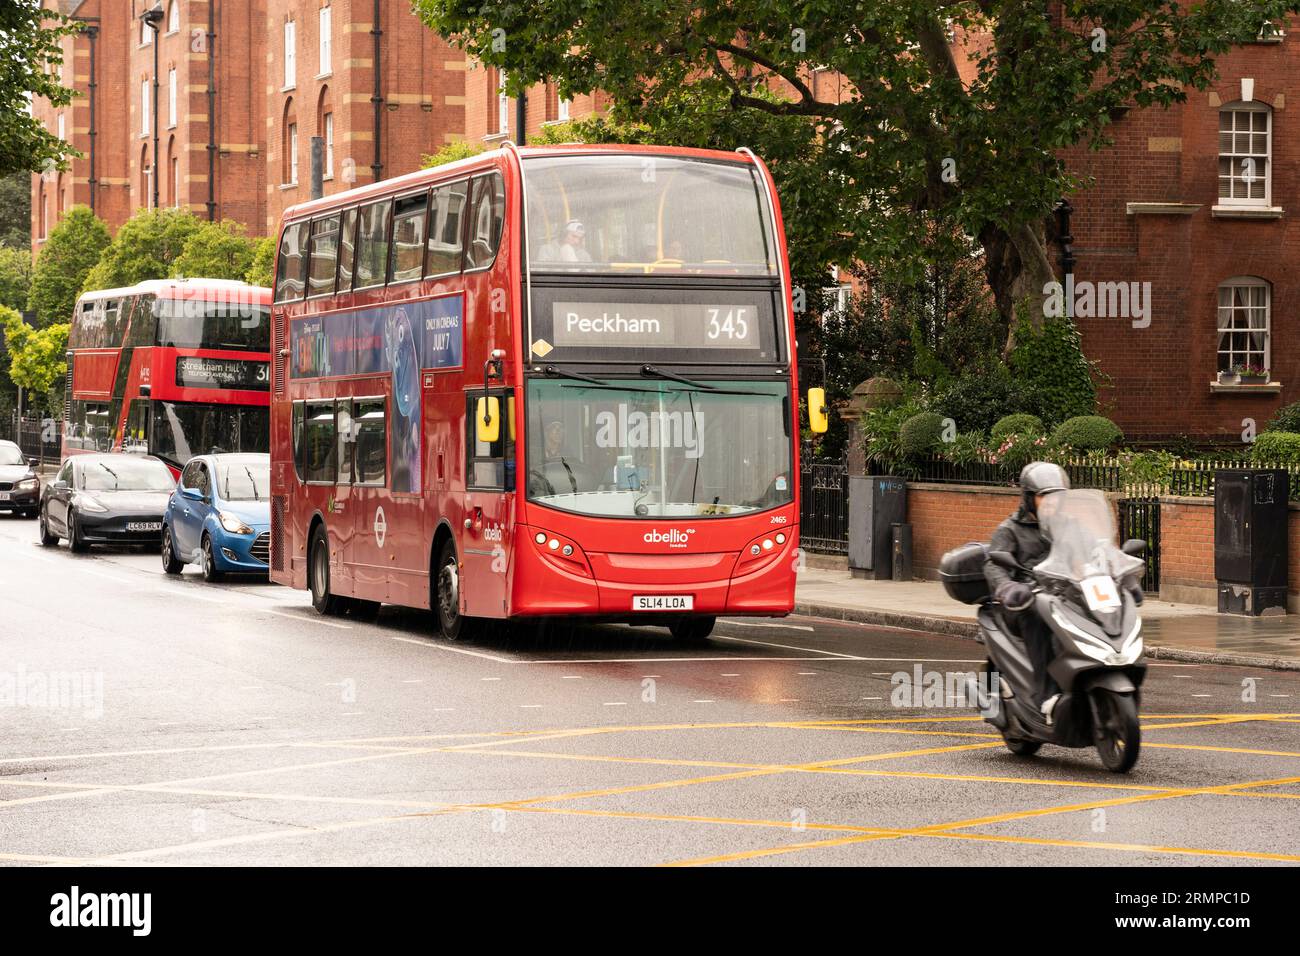 A red double decker bus operated by Abellio London - a bus company operating services in Greater London under contract to Transport for London Stock Photo